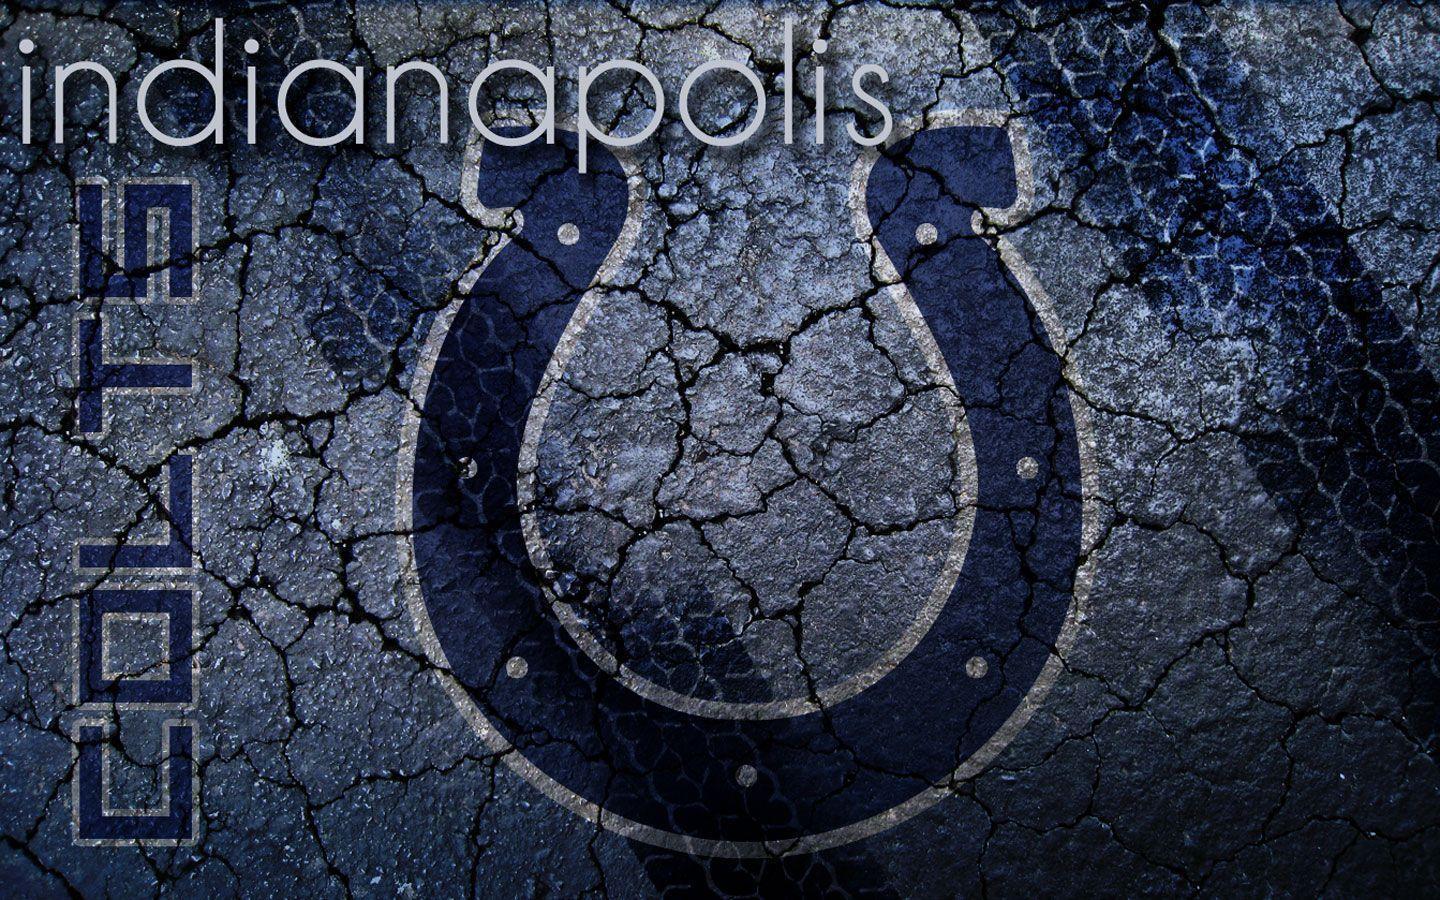 Colts wallpapers